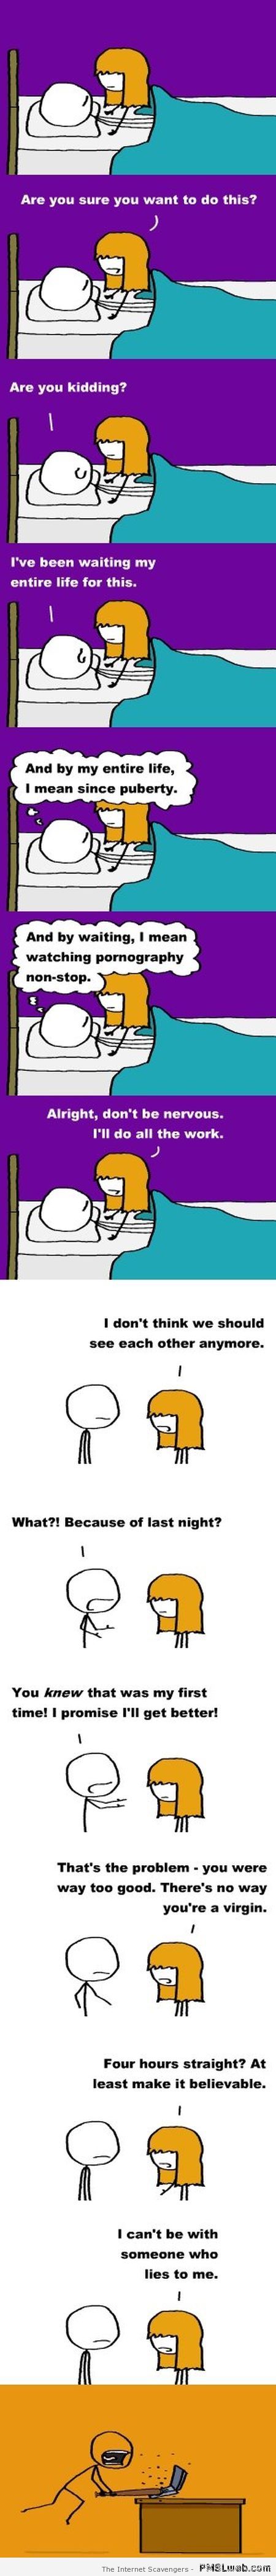 In bed with girlfriend funny comic at PMSLweb.com